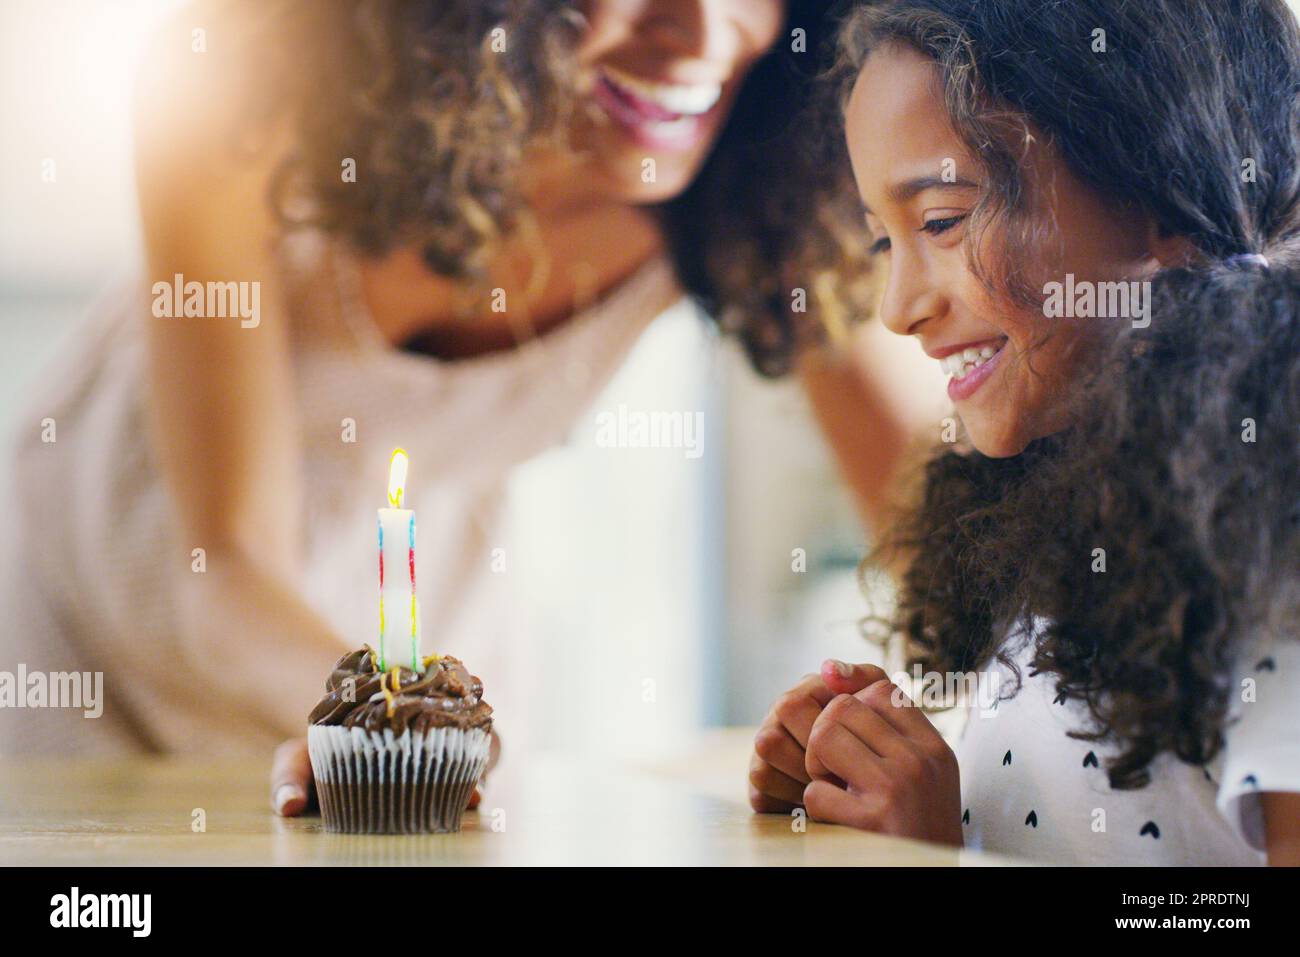 Sometimes the little things bring the most joy in life. a mother and her young daughter celebrating a birthday at home. Stock Photo